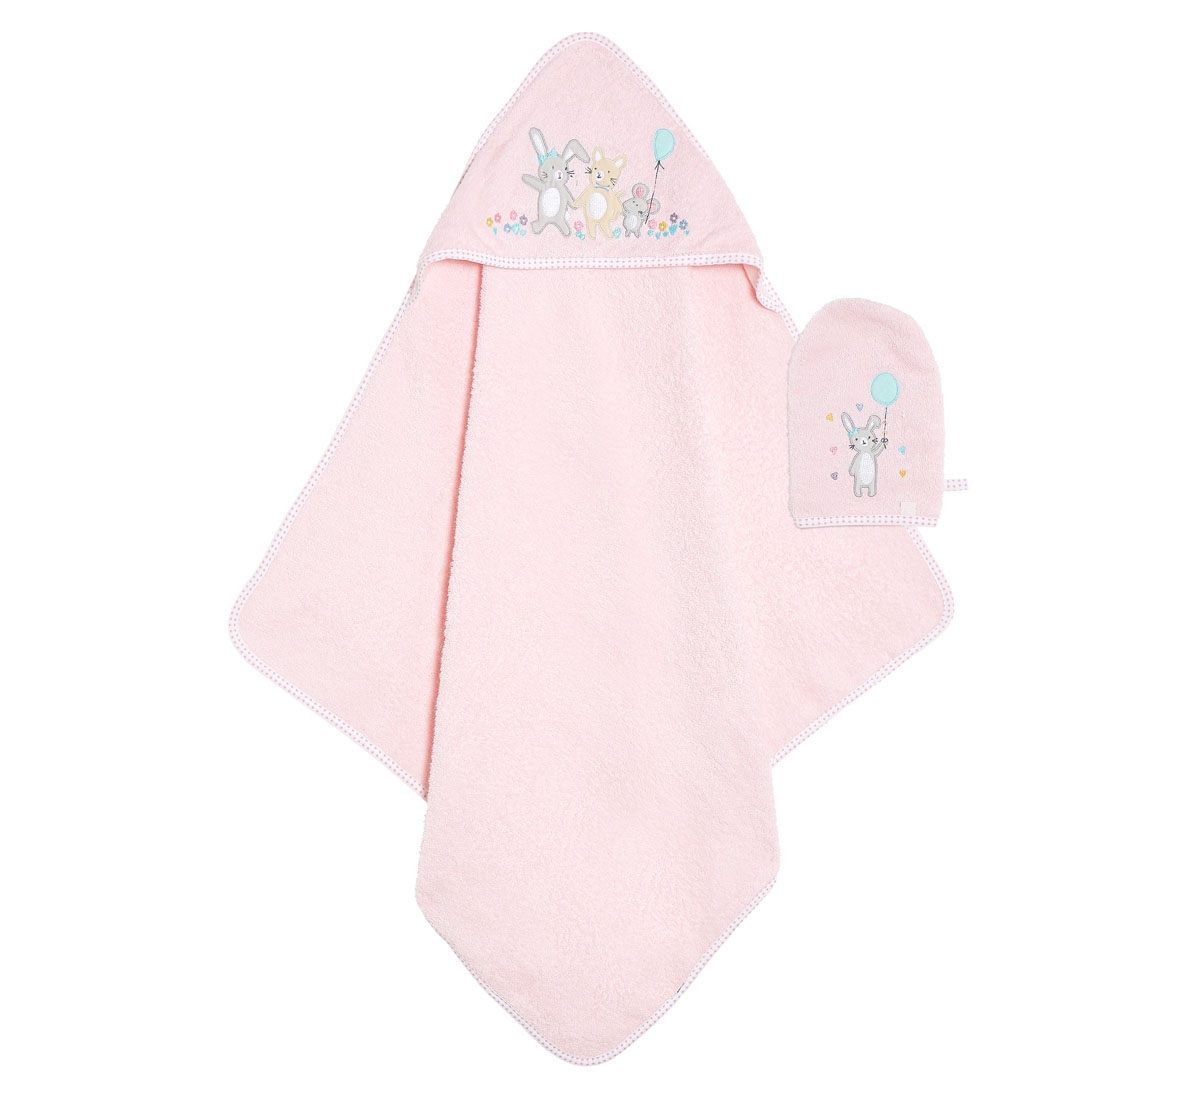 Mothercare | Confetti Party Cuddle 'N' Dry and Mitt Set